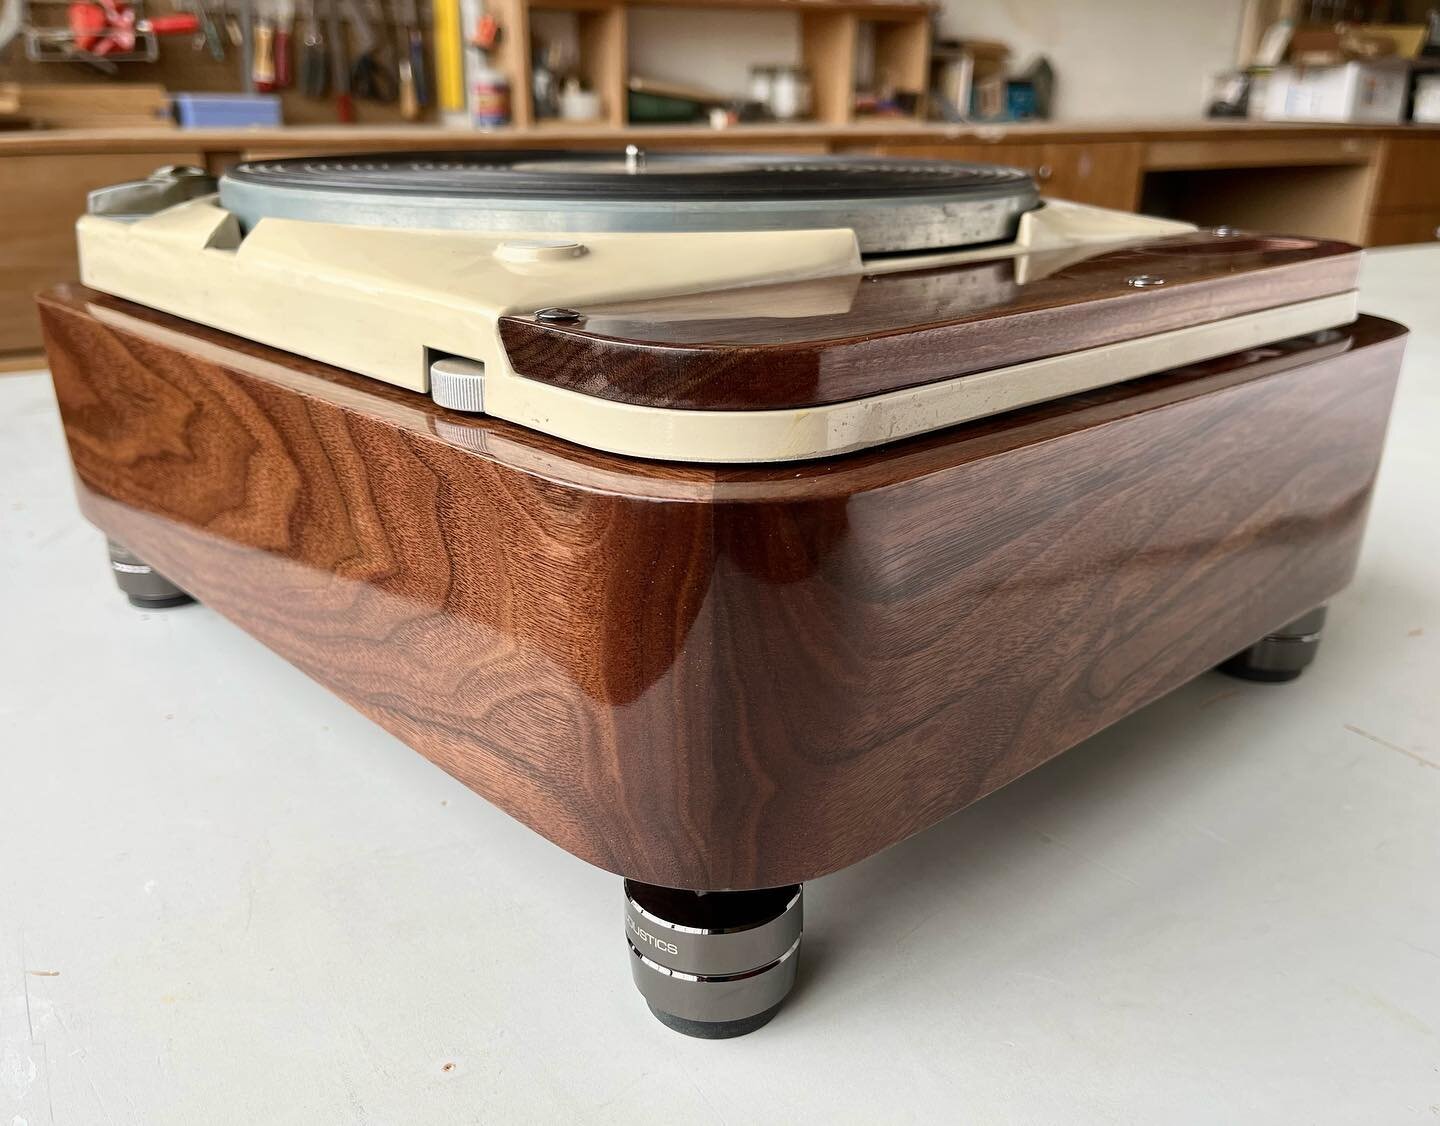 A nice, glossy walnut Thorens TD-124 plinth just completed. My client was looking for specific grain patterning to go with some other furnishings in his room. He also upgraded to @isoacoustics Gaia III feet which look really sharp. Topped off with a 